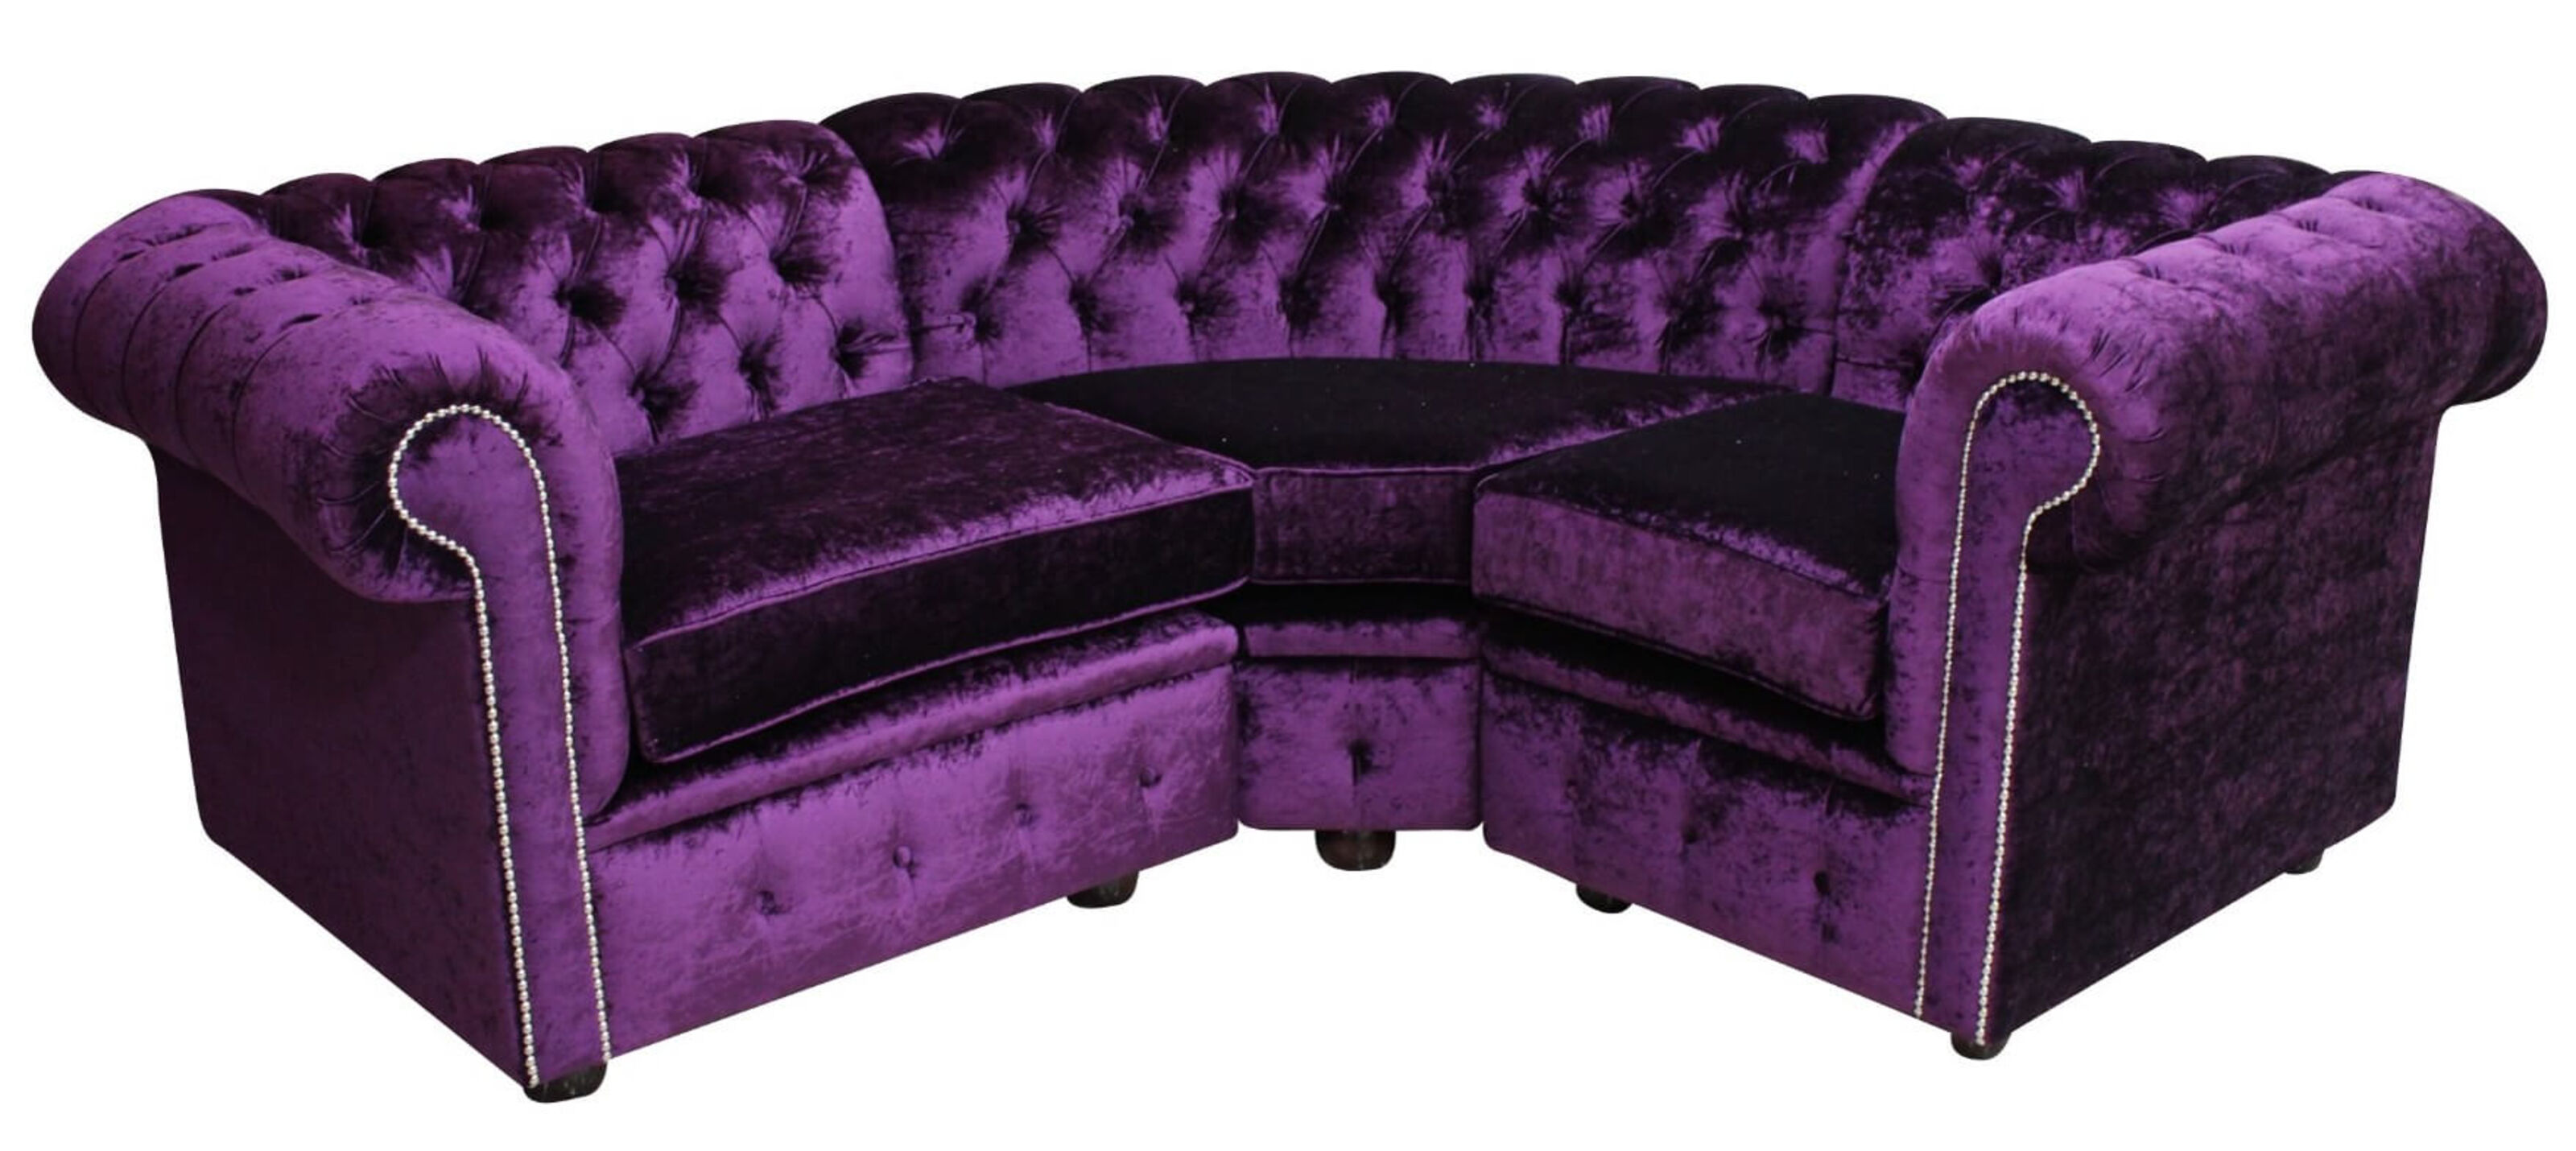 Classic Comfort Chesterfield Couches Available for Sale in Johannesburg  %Post Title